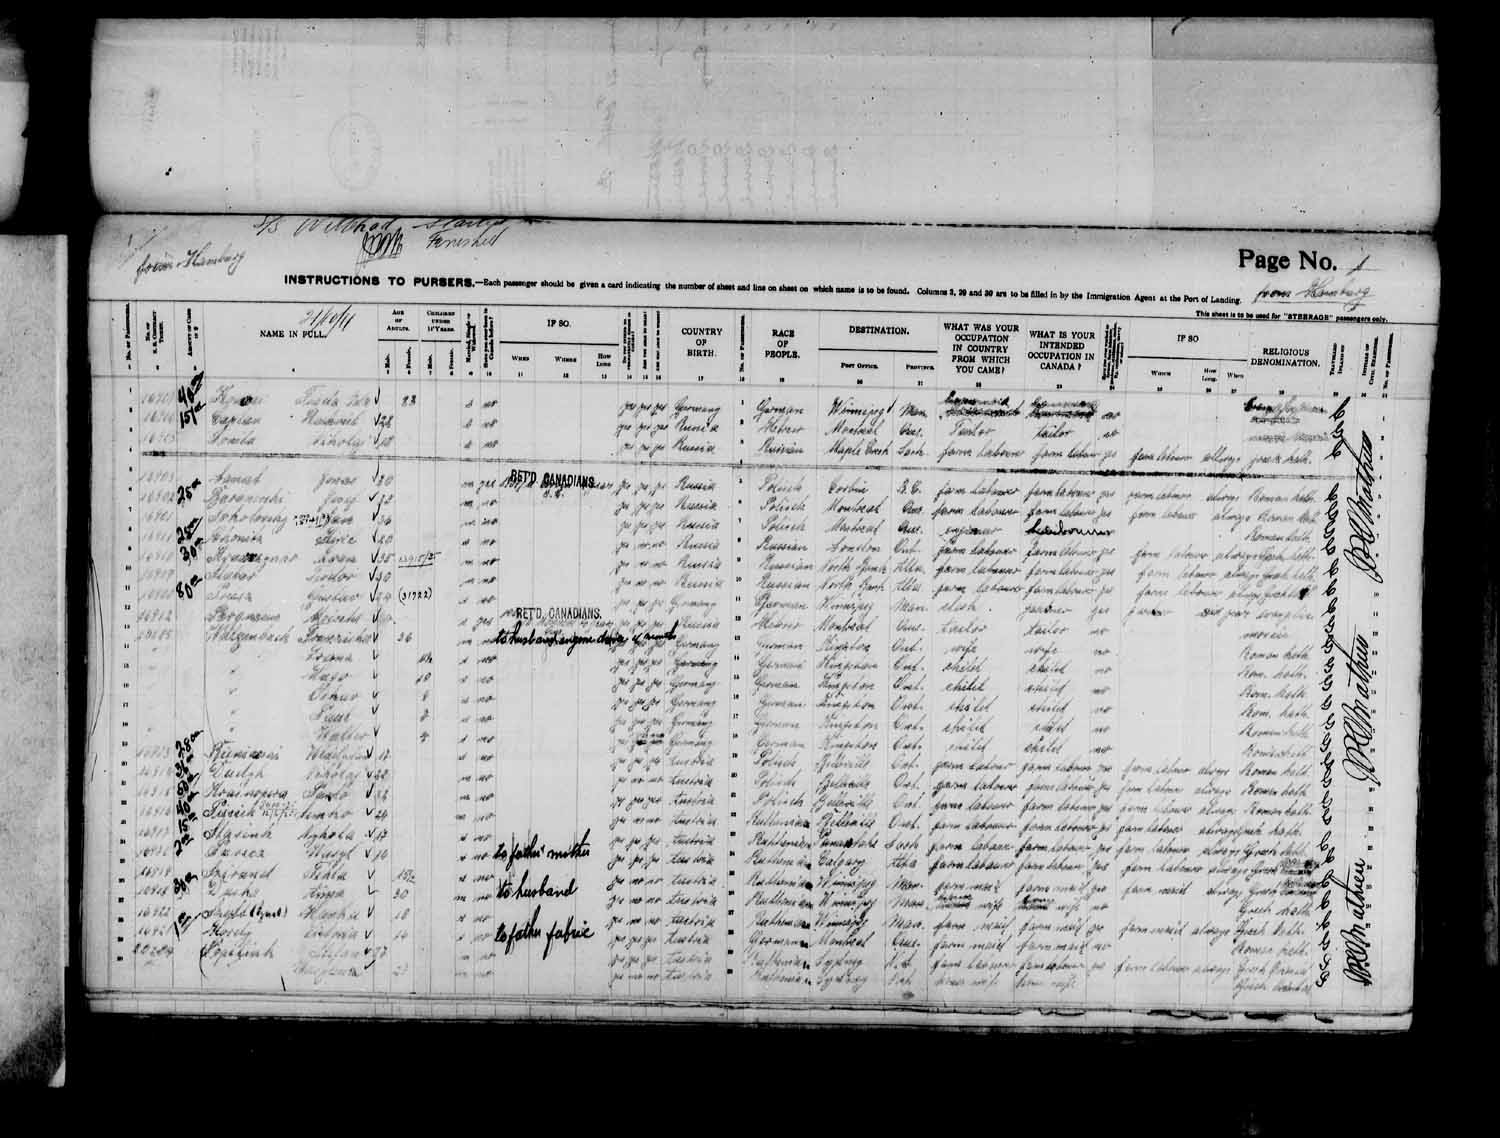 Digitized page of Passenger Lists for Image No.: e003575013